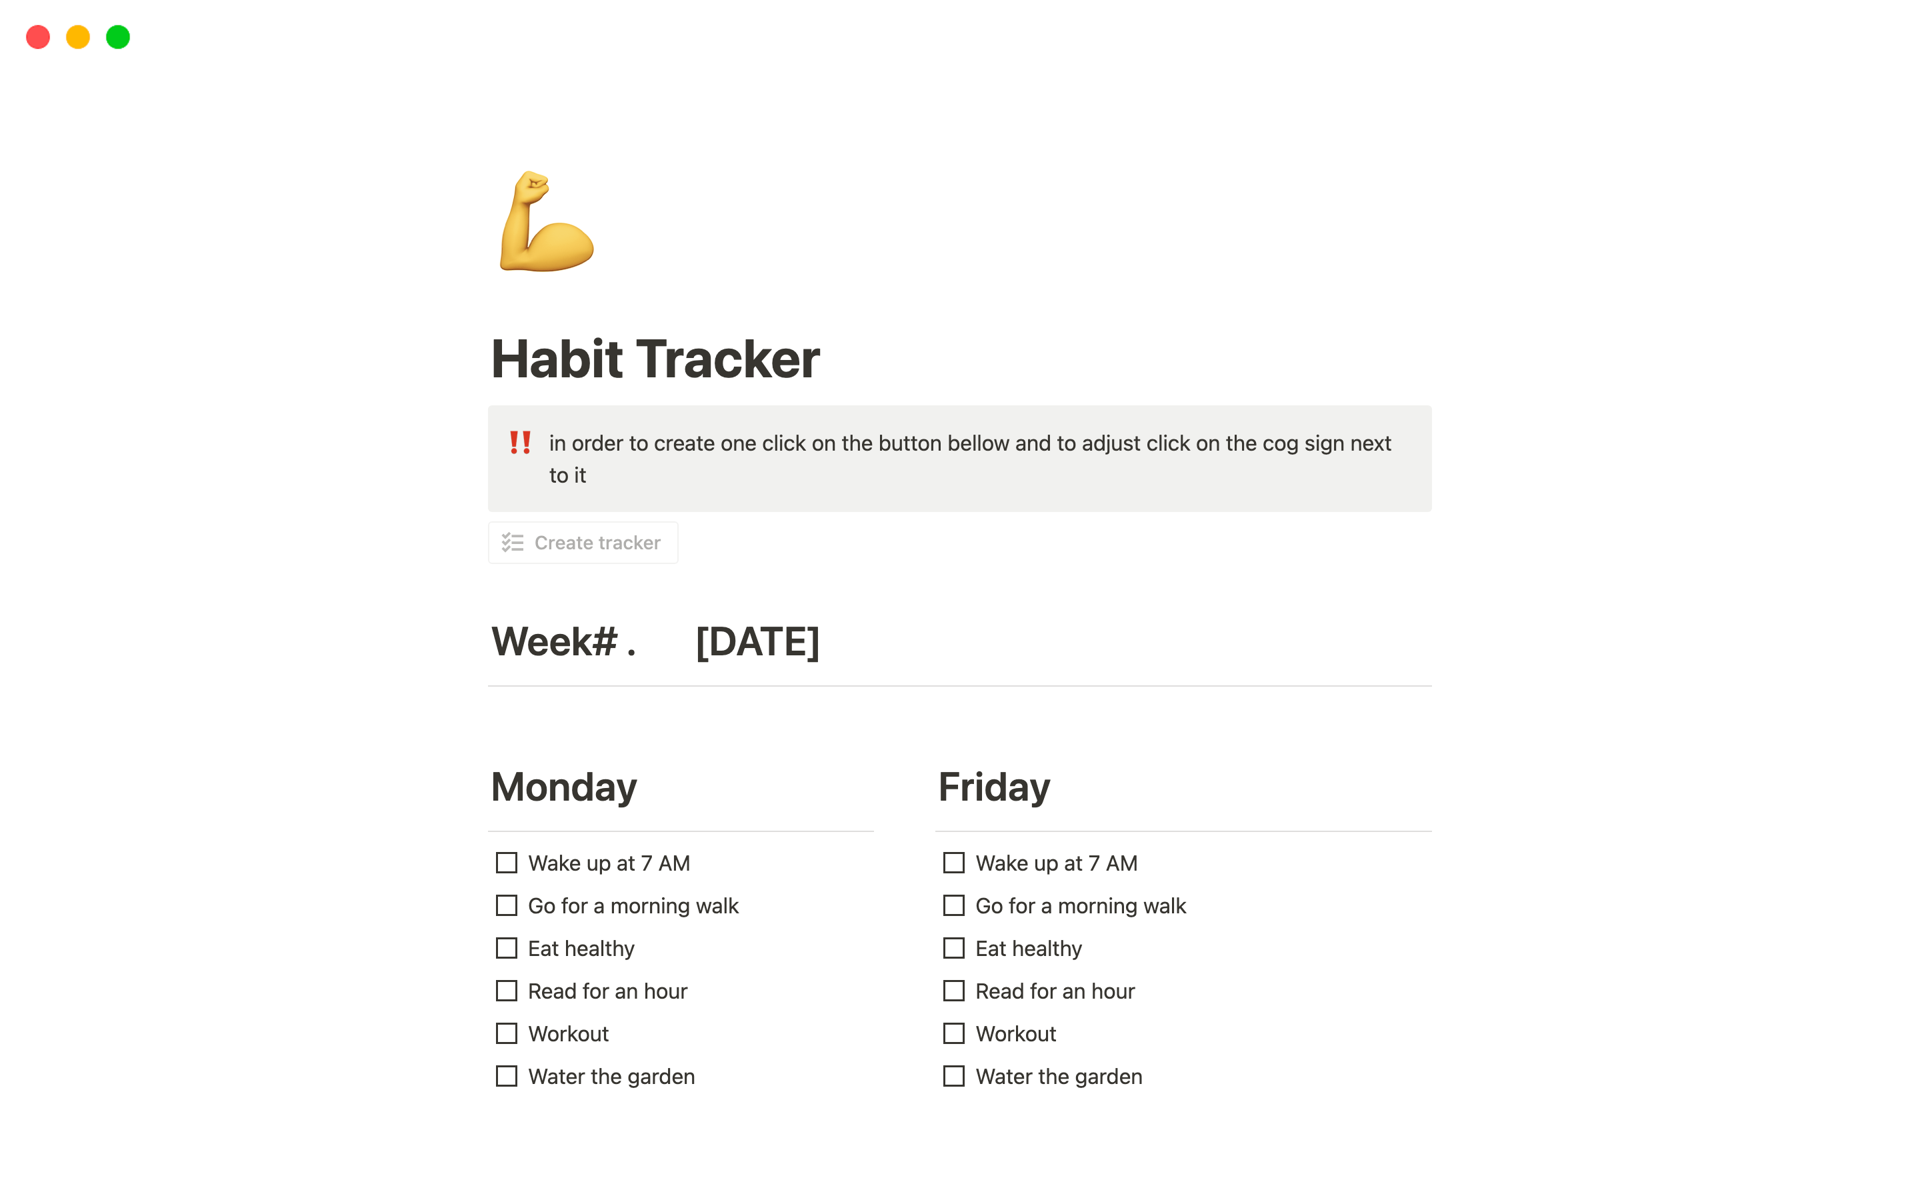 This template is for tracking your habits.